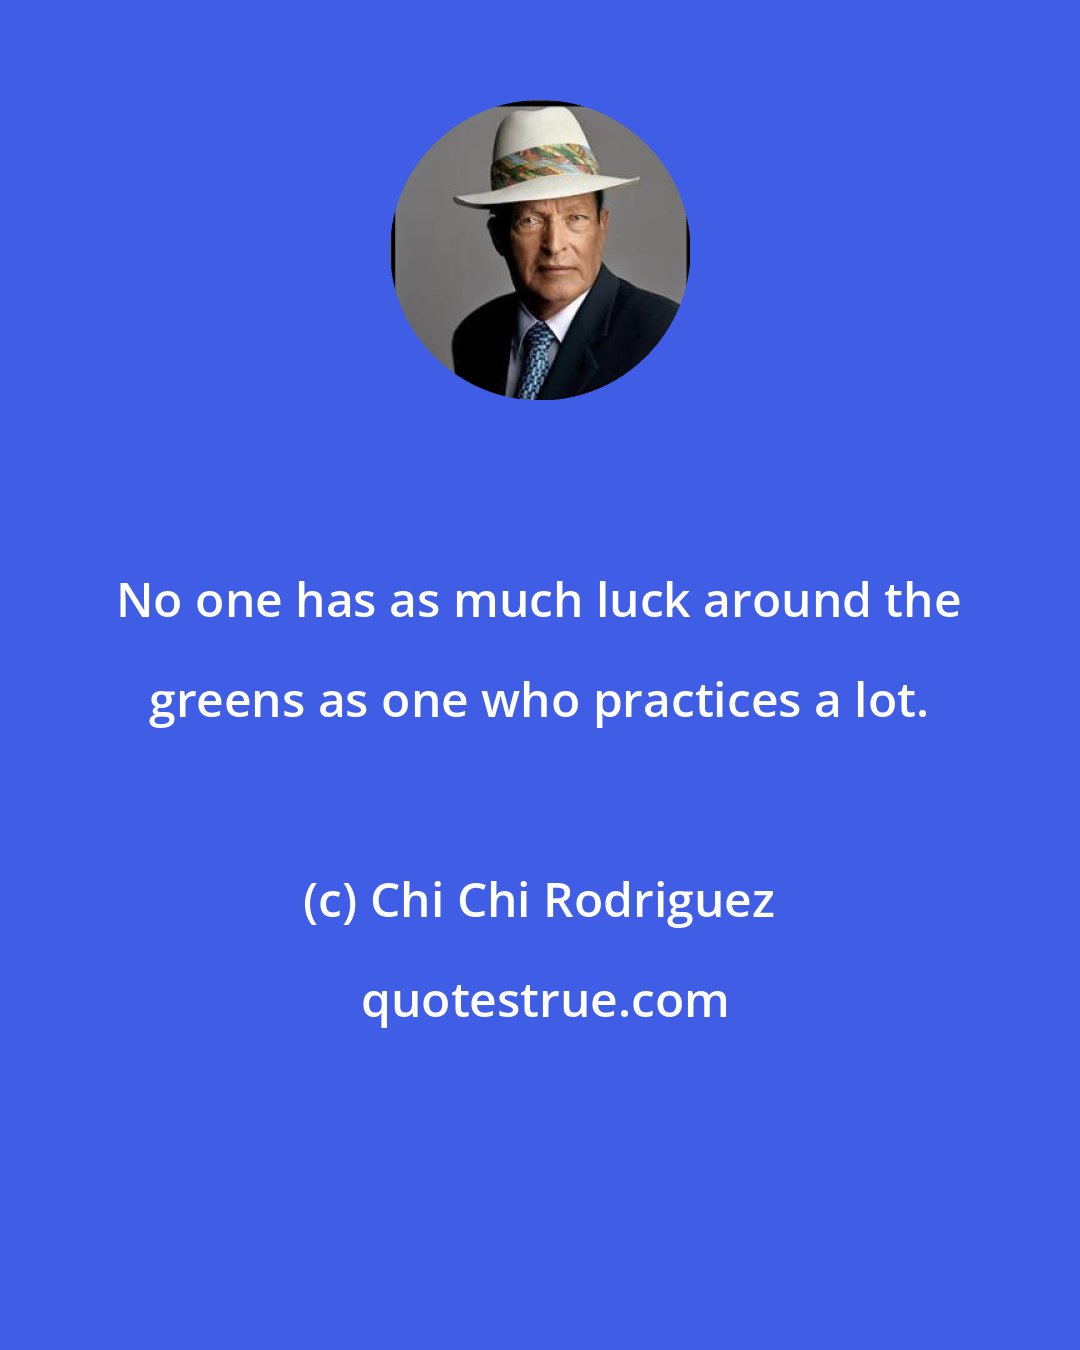 Chi Chi Rodriguez: No one has as much luck around the greens as one who practices a lot.